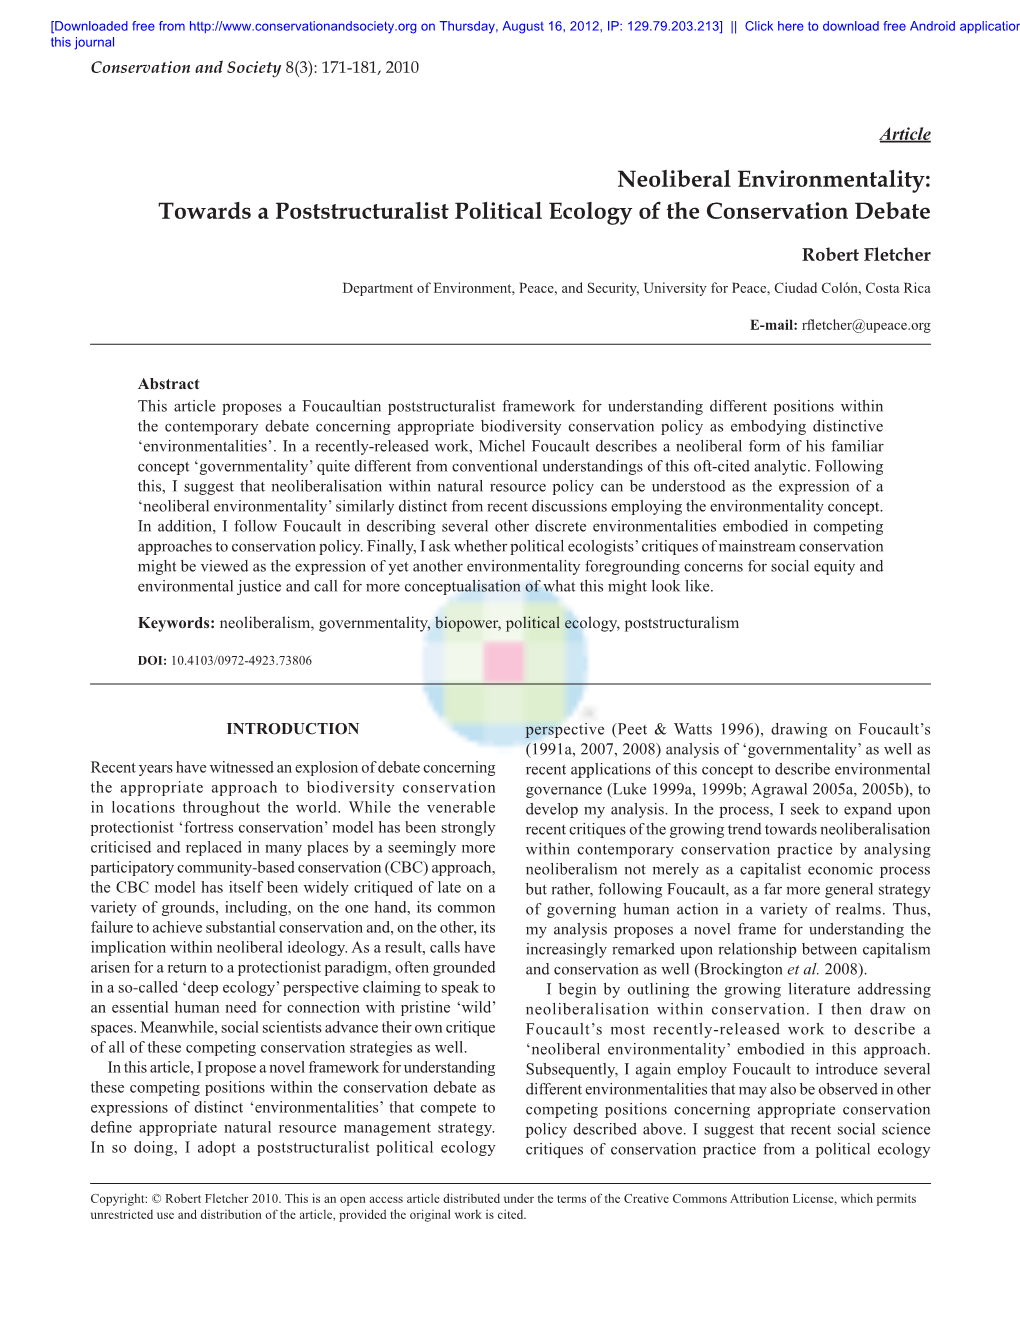 Neoliberal Environmentality: Towards a Poststructuralist Political Ecology of the Conservation Debate